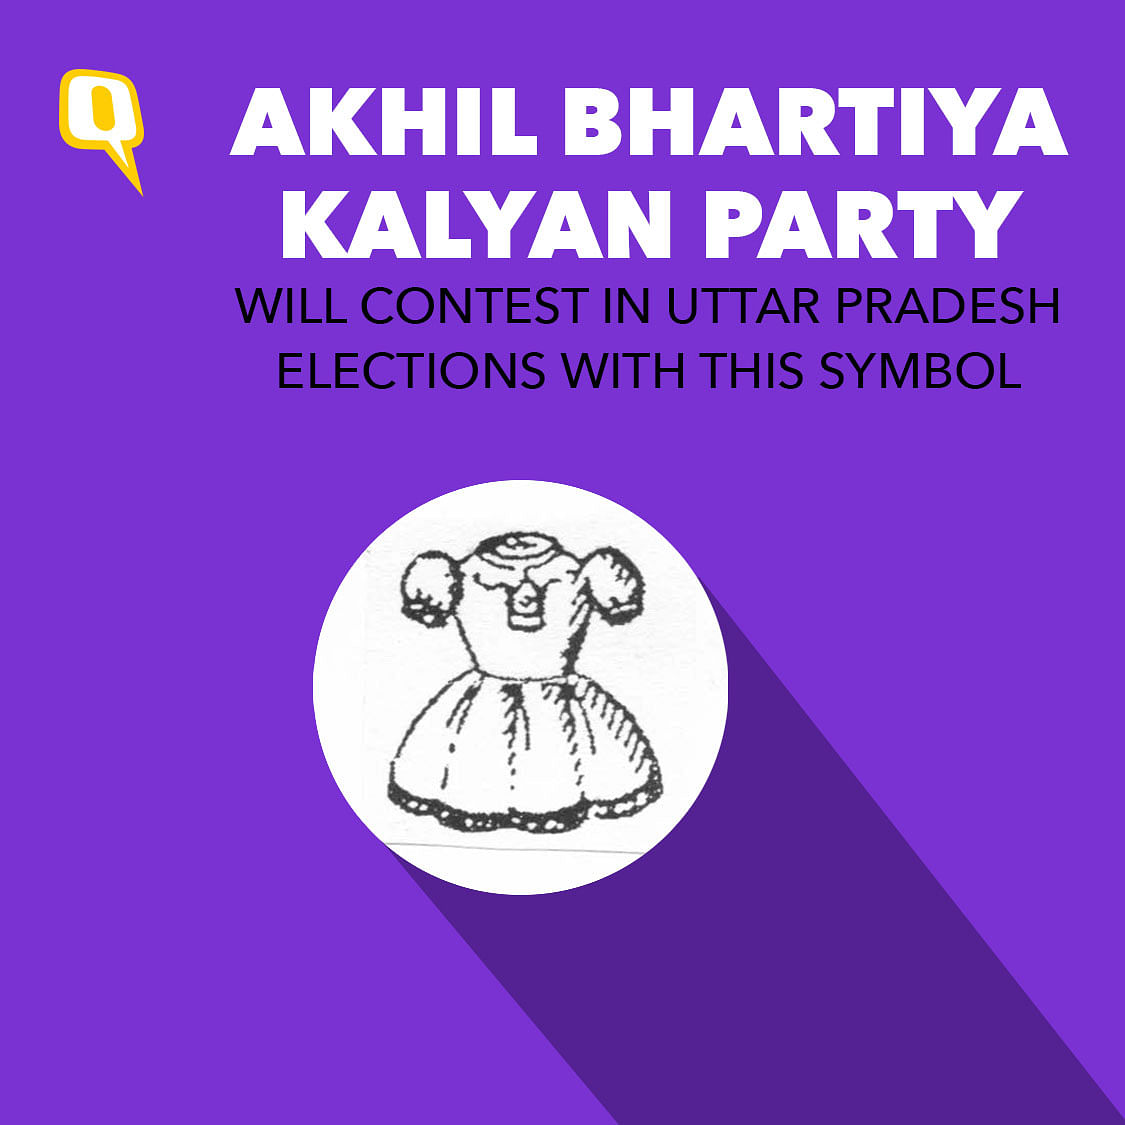 Voting for a balloon, or a frock? There are some very weird symbols in the Indian election.